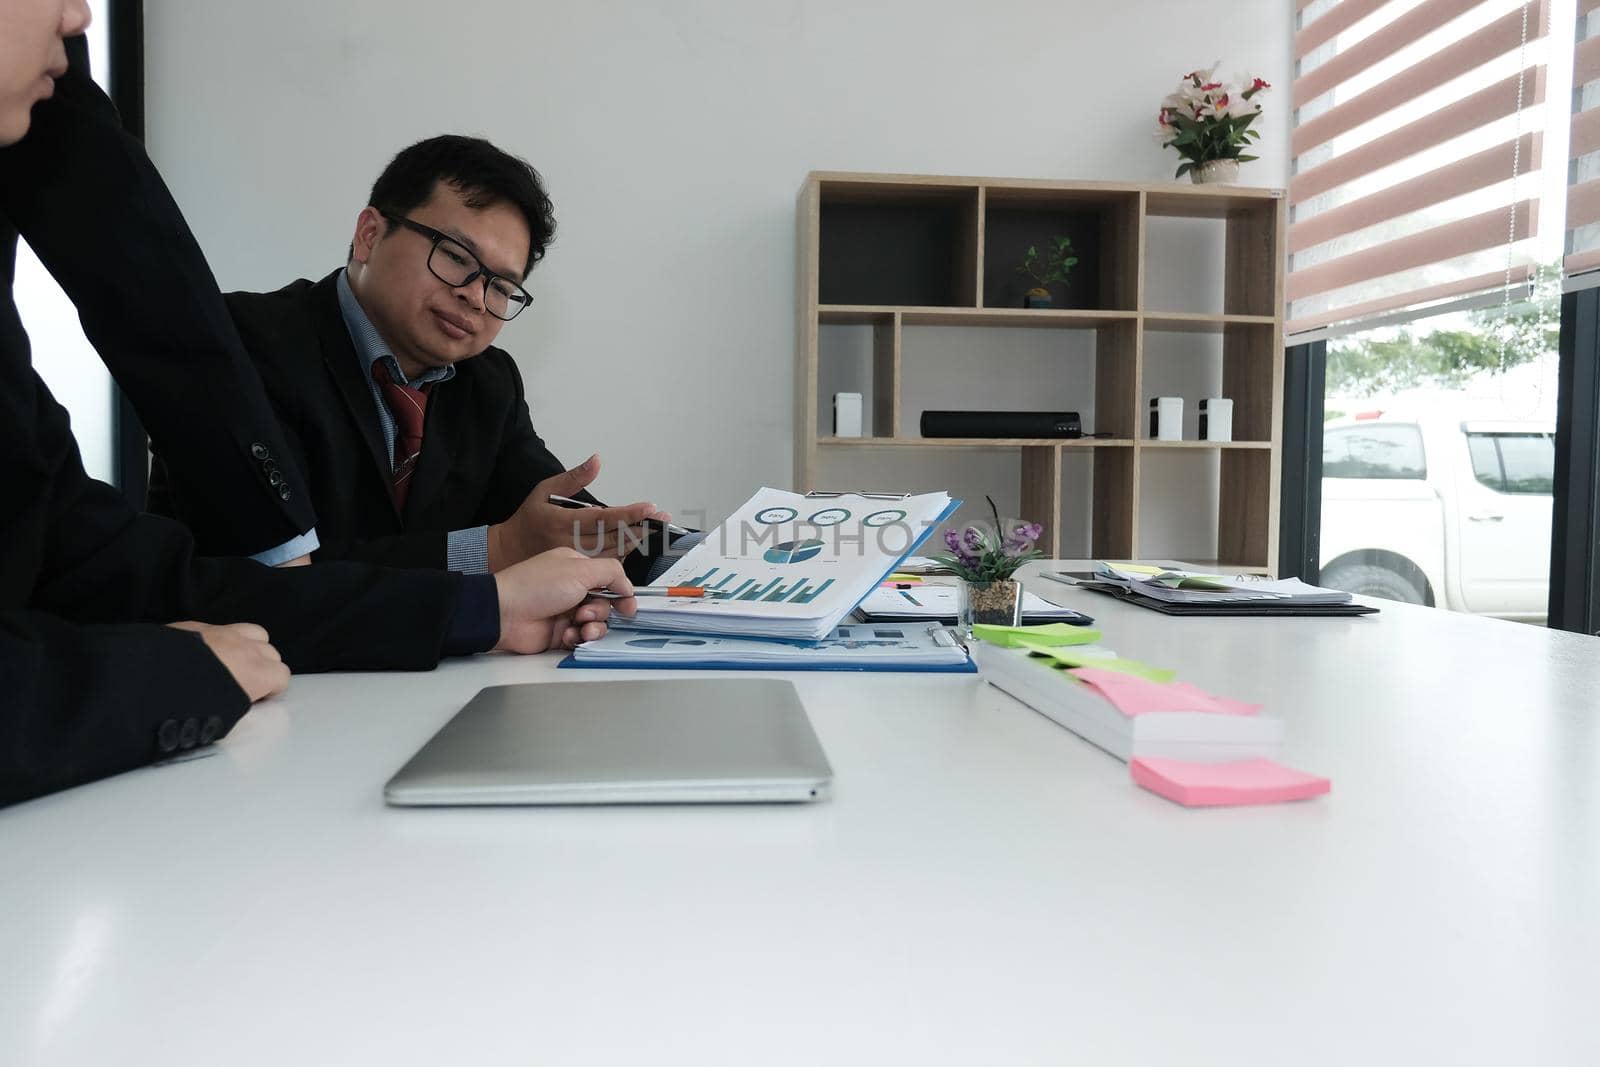 business adviser analyzing company financial report. professional investor discussing idea. businessman working on new startup project with co working team.